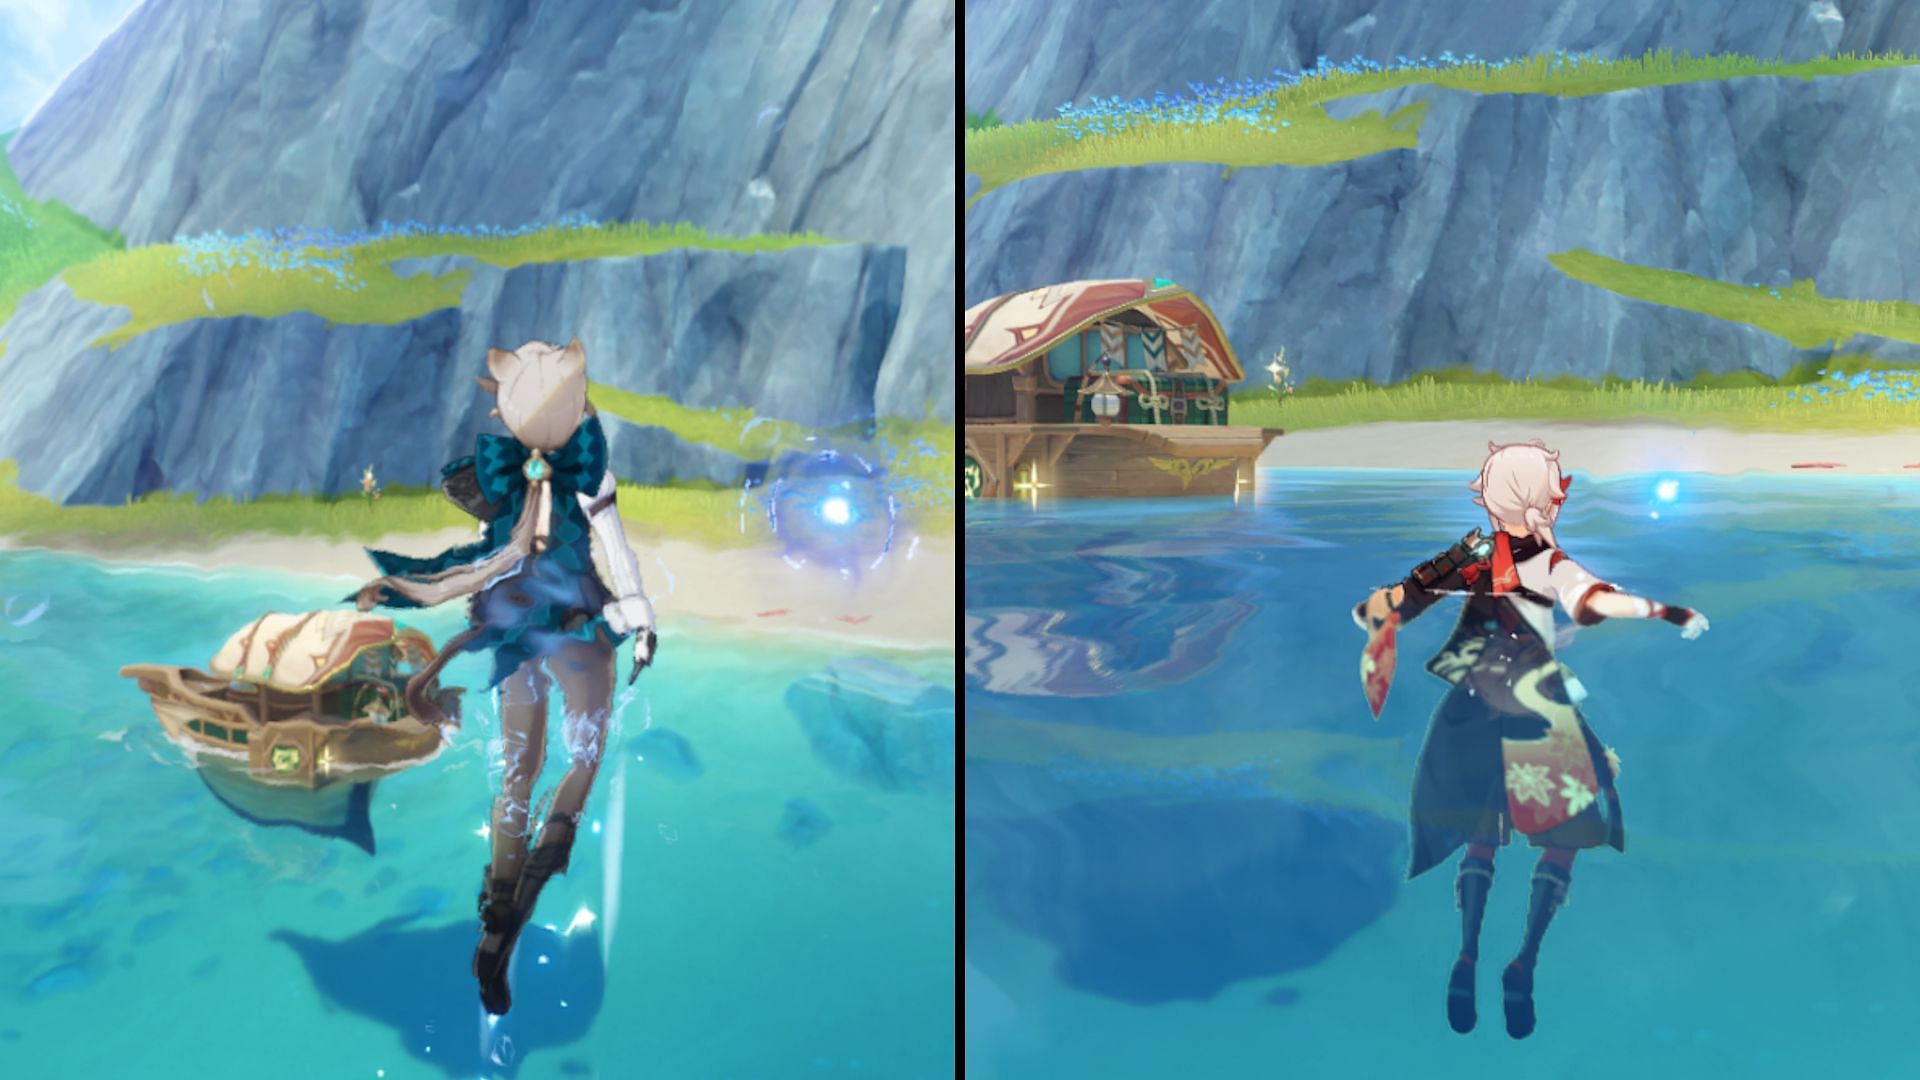 Only Fontaine characters can do the move on the left (Image via HoYoverse)